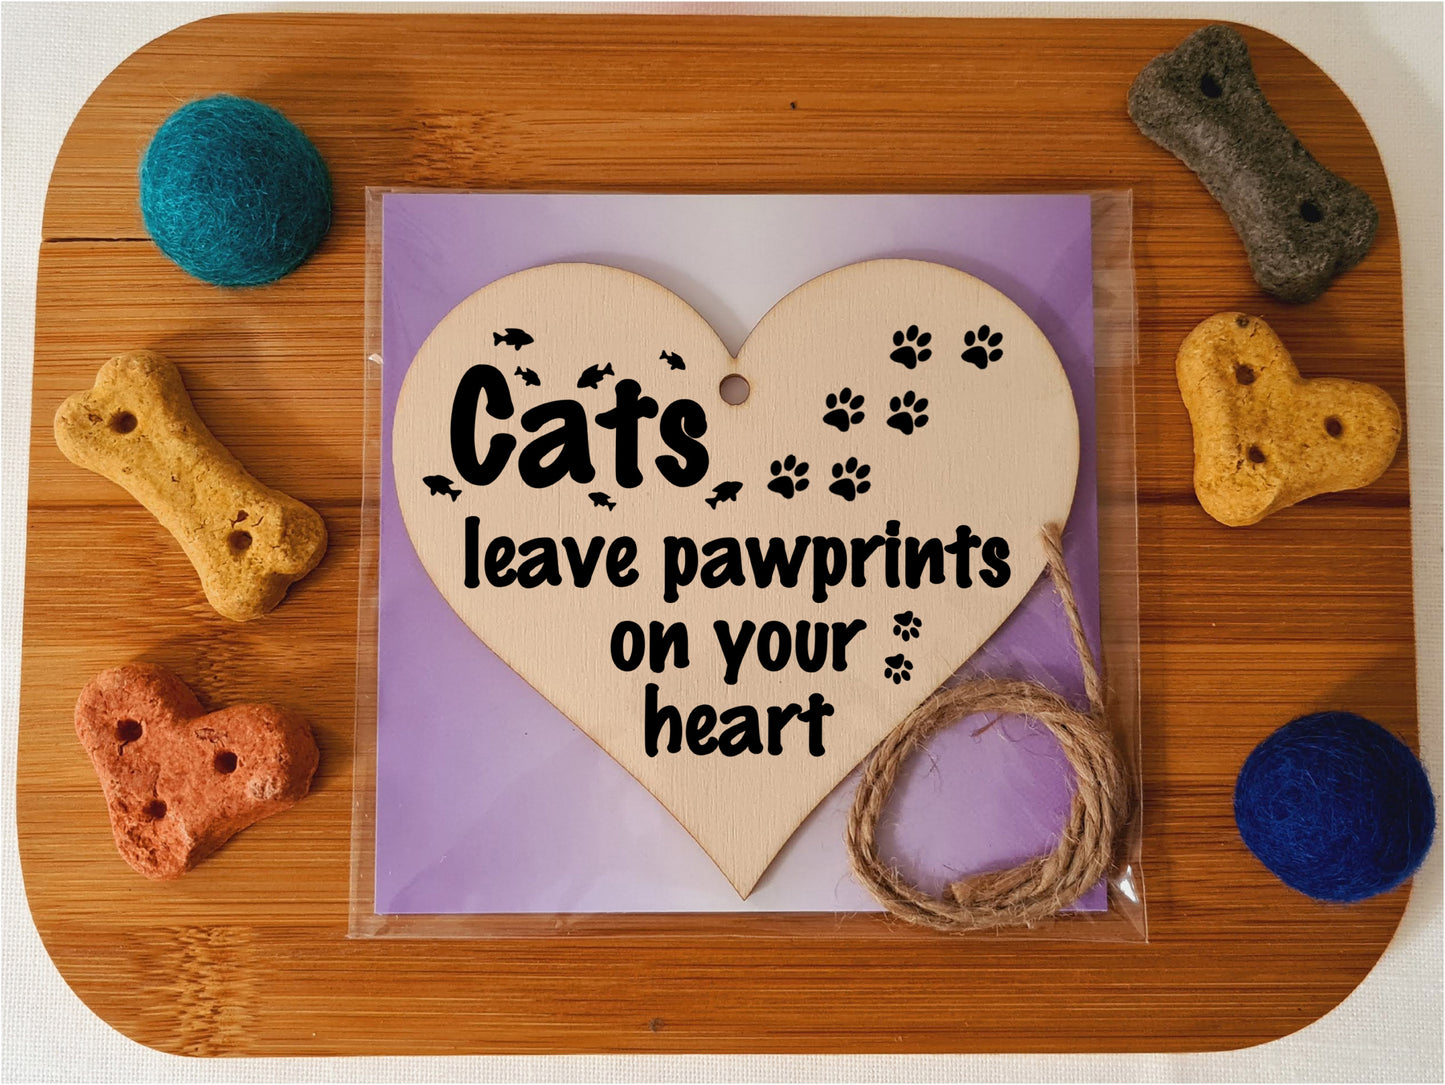 Handmade Wooden Hanging Heart Plaque Gift Perfect for Cat Lovers